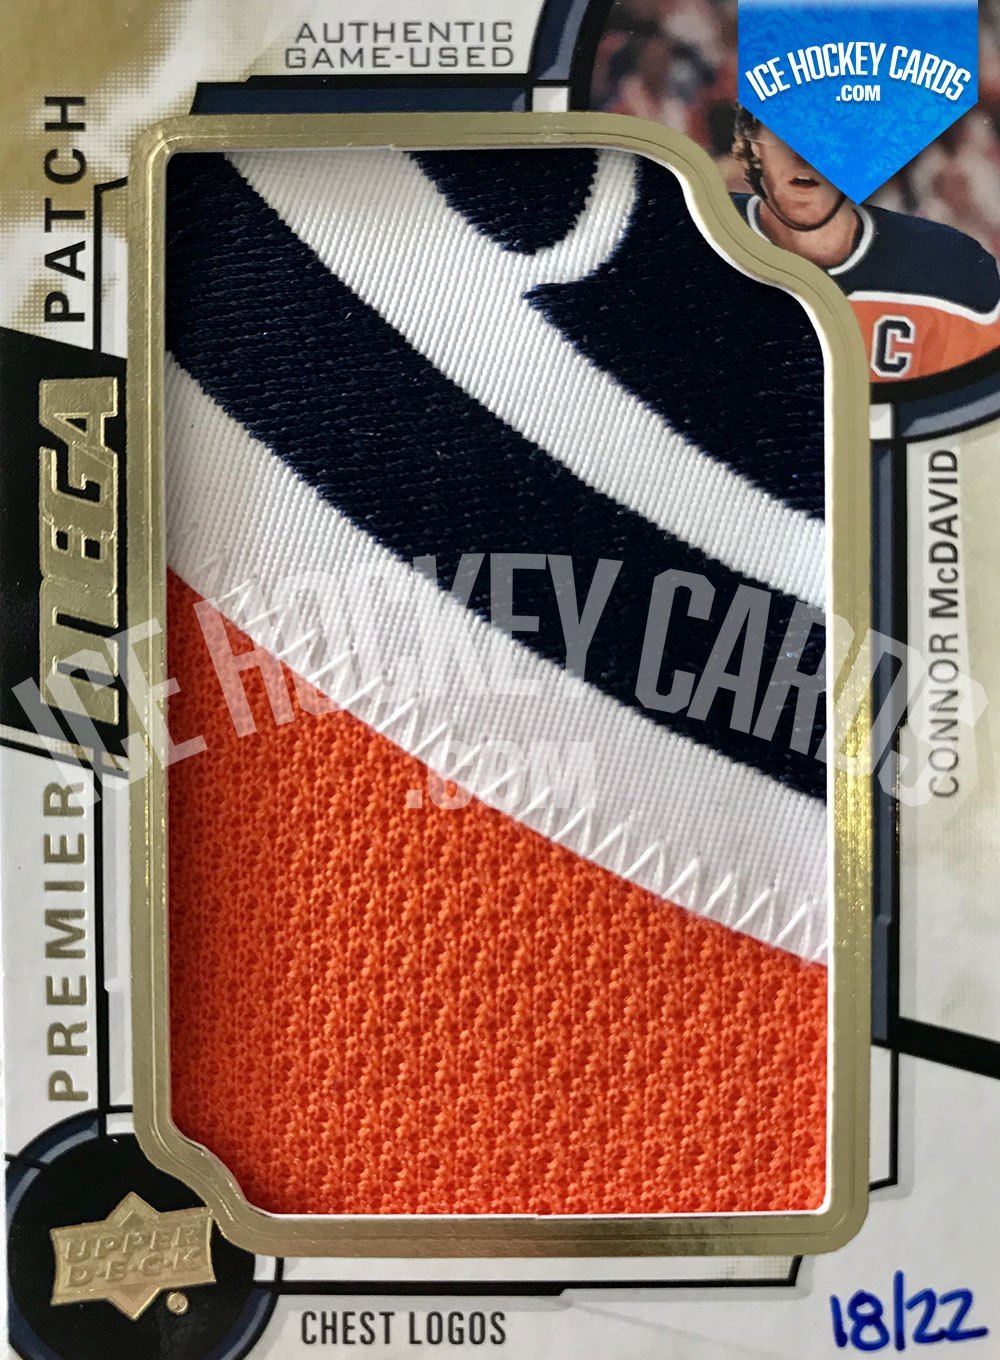 Upper Deck - Premier Hockey 2018-19 - Connor McDavid Authentic Game-Used Premier Mega Patch Card up to 22 prints RARE